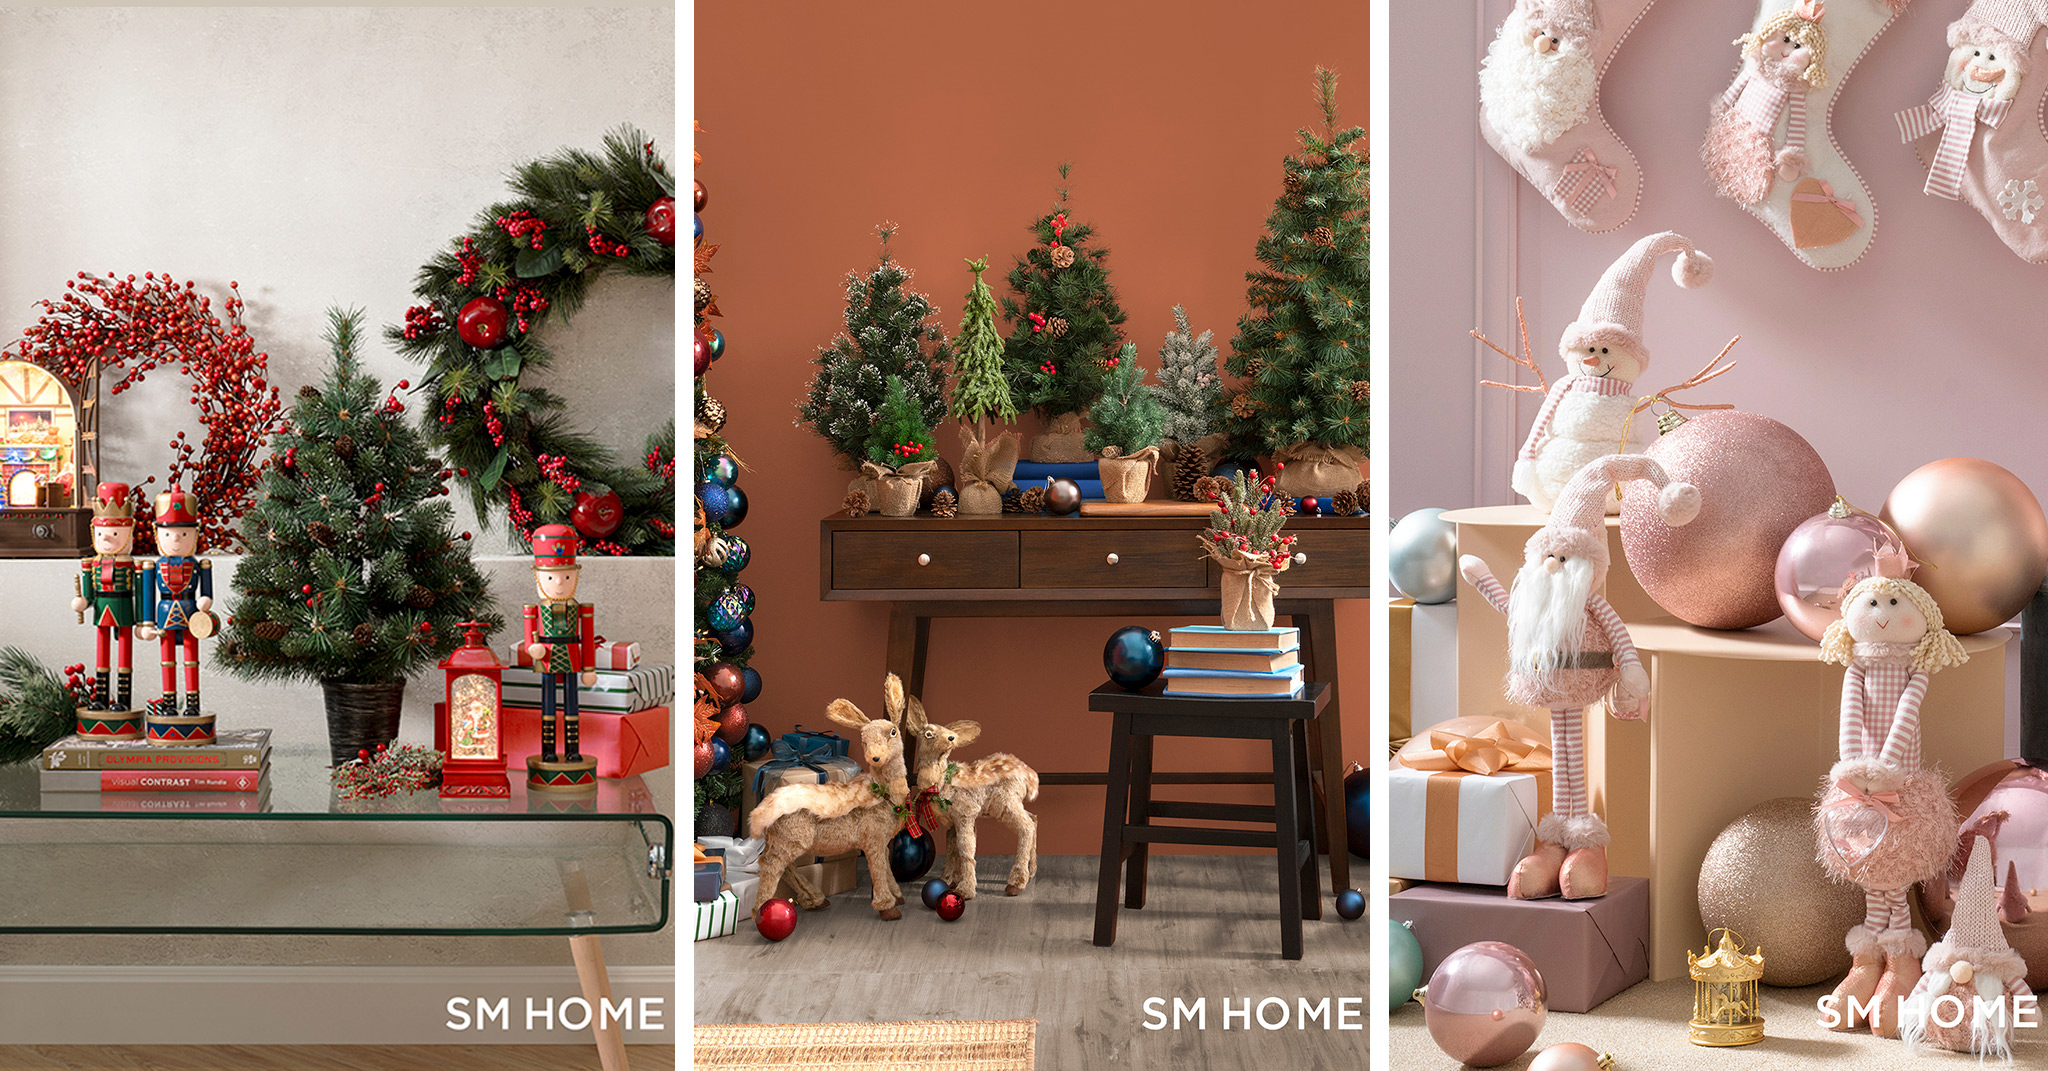 SM Home’s Christmas décor sale proves that it’s never too late to decorate